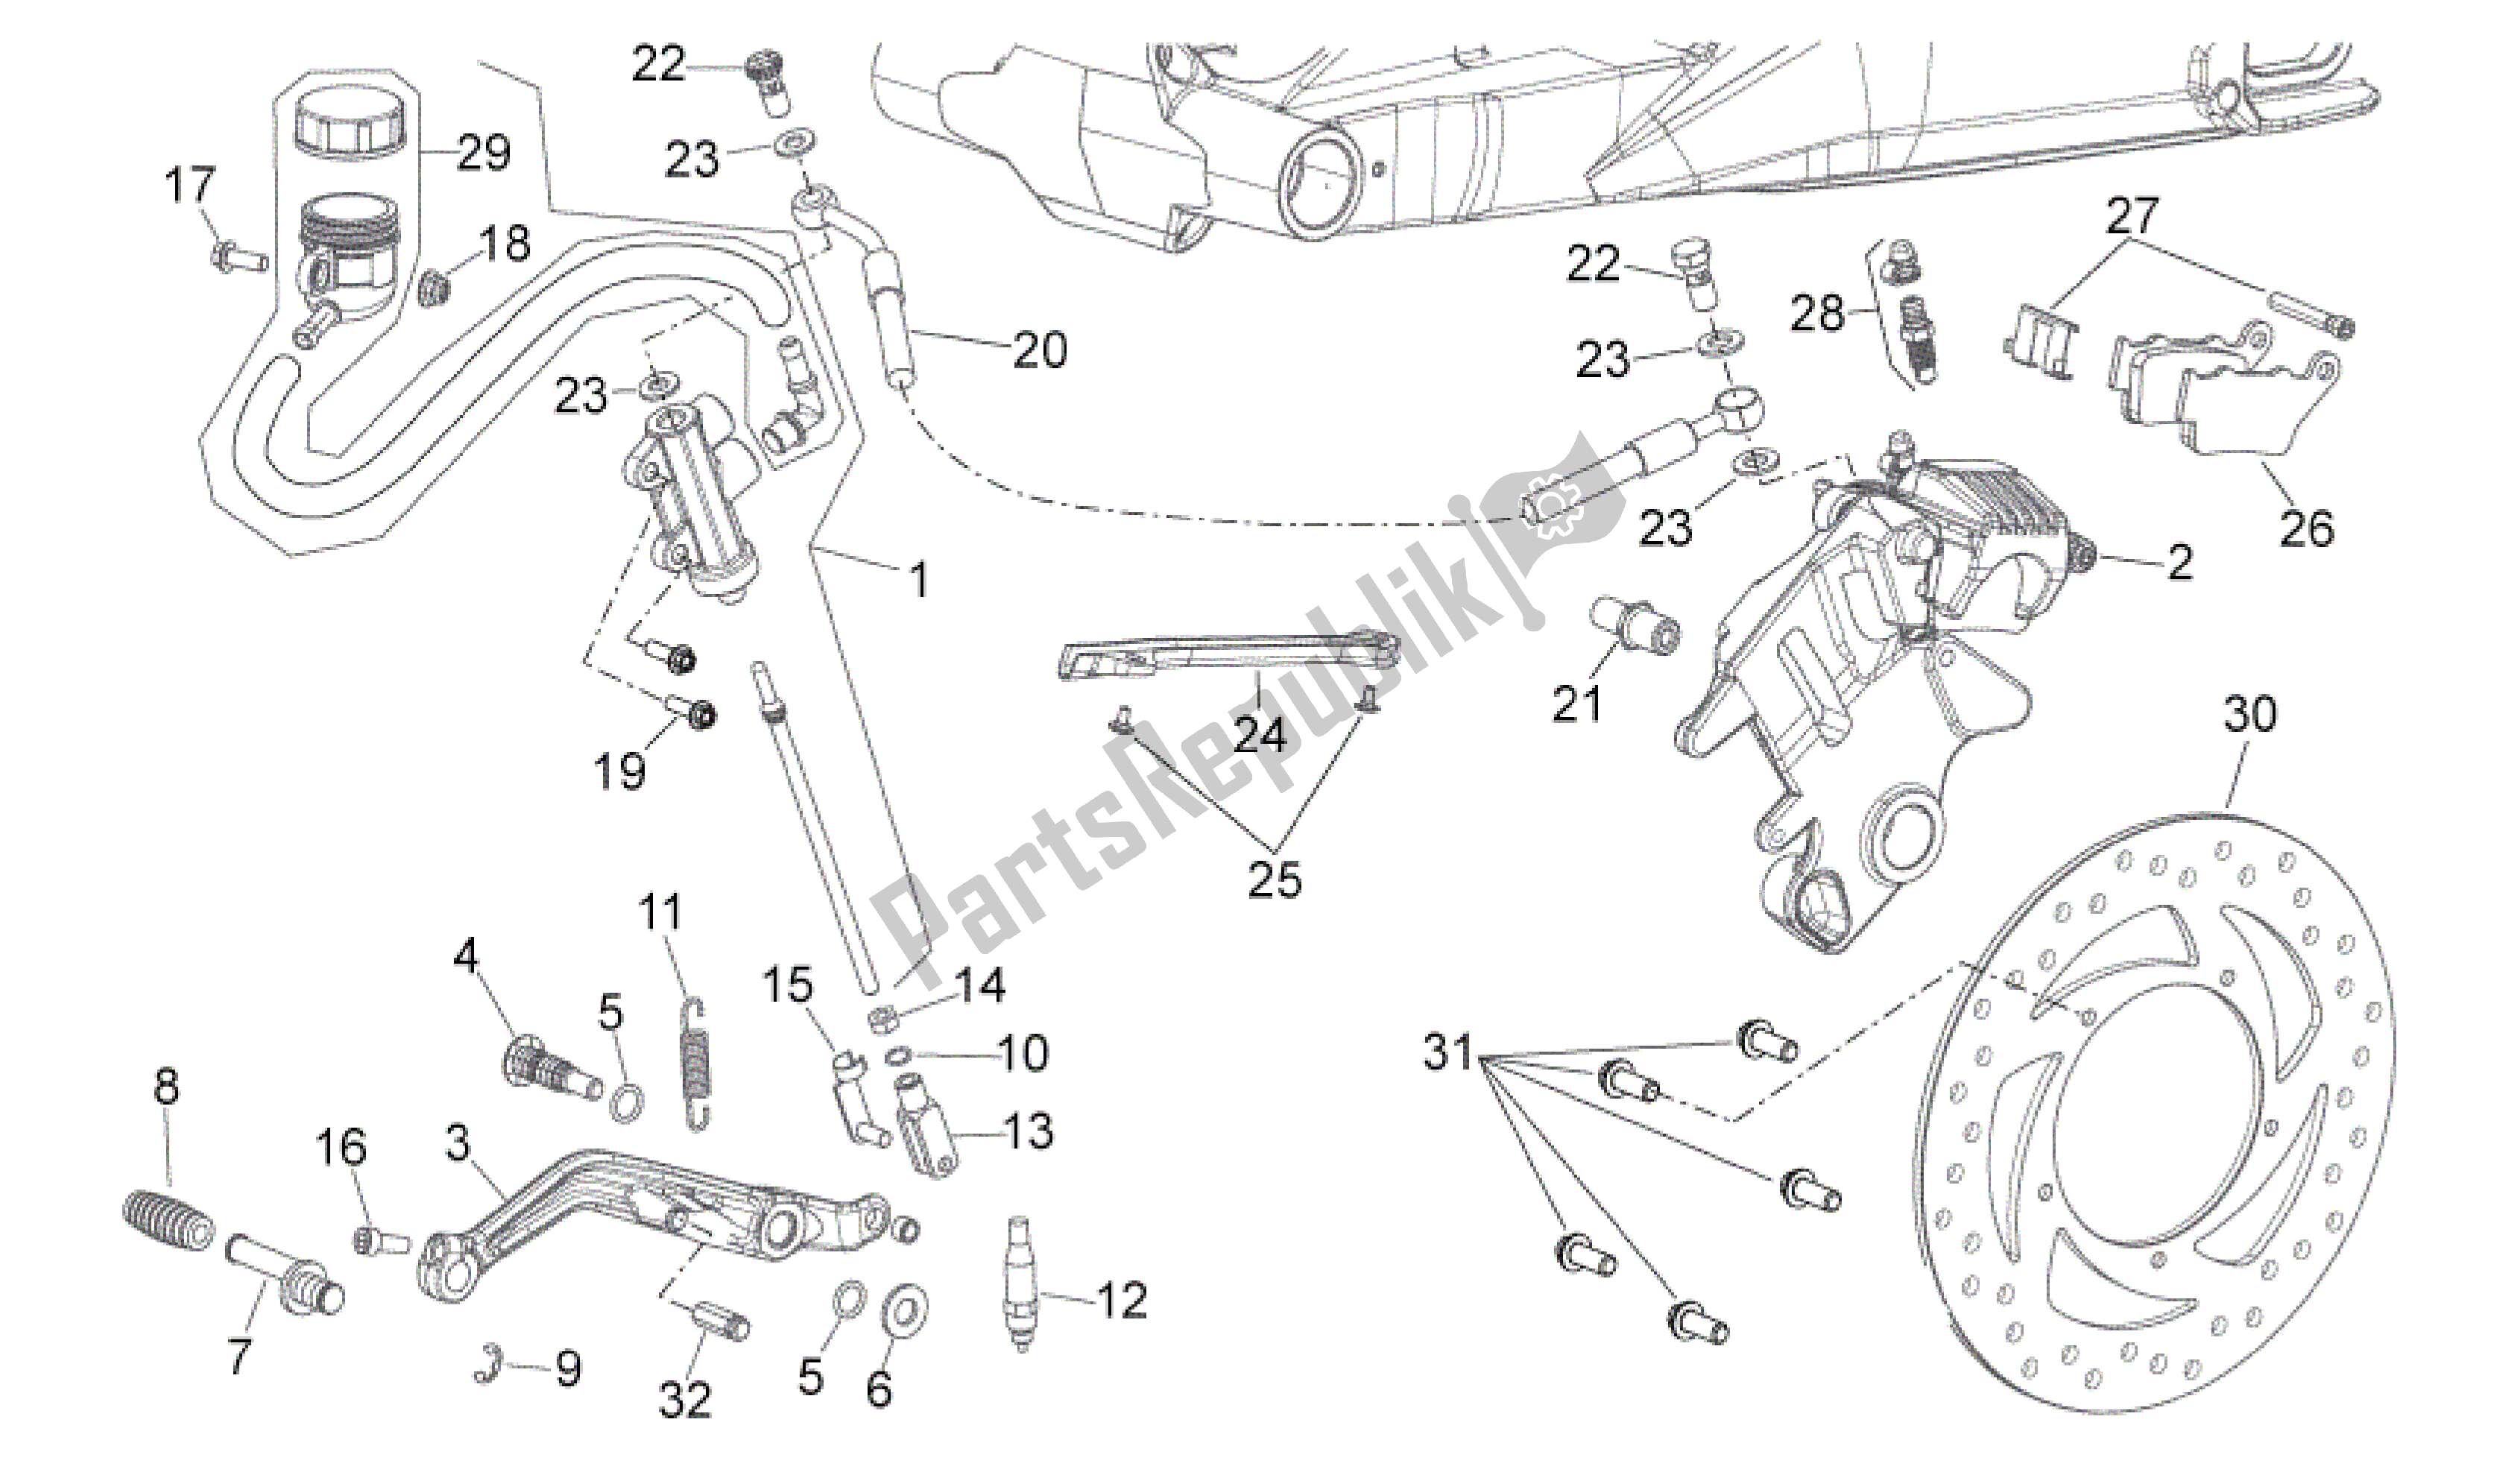 All parts for the Rear Brake System of the Aprilia Shiver 750 2009